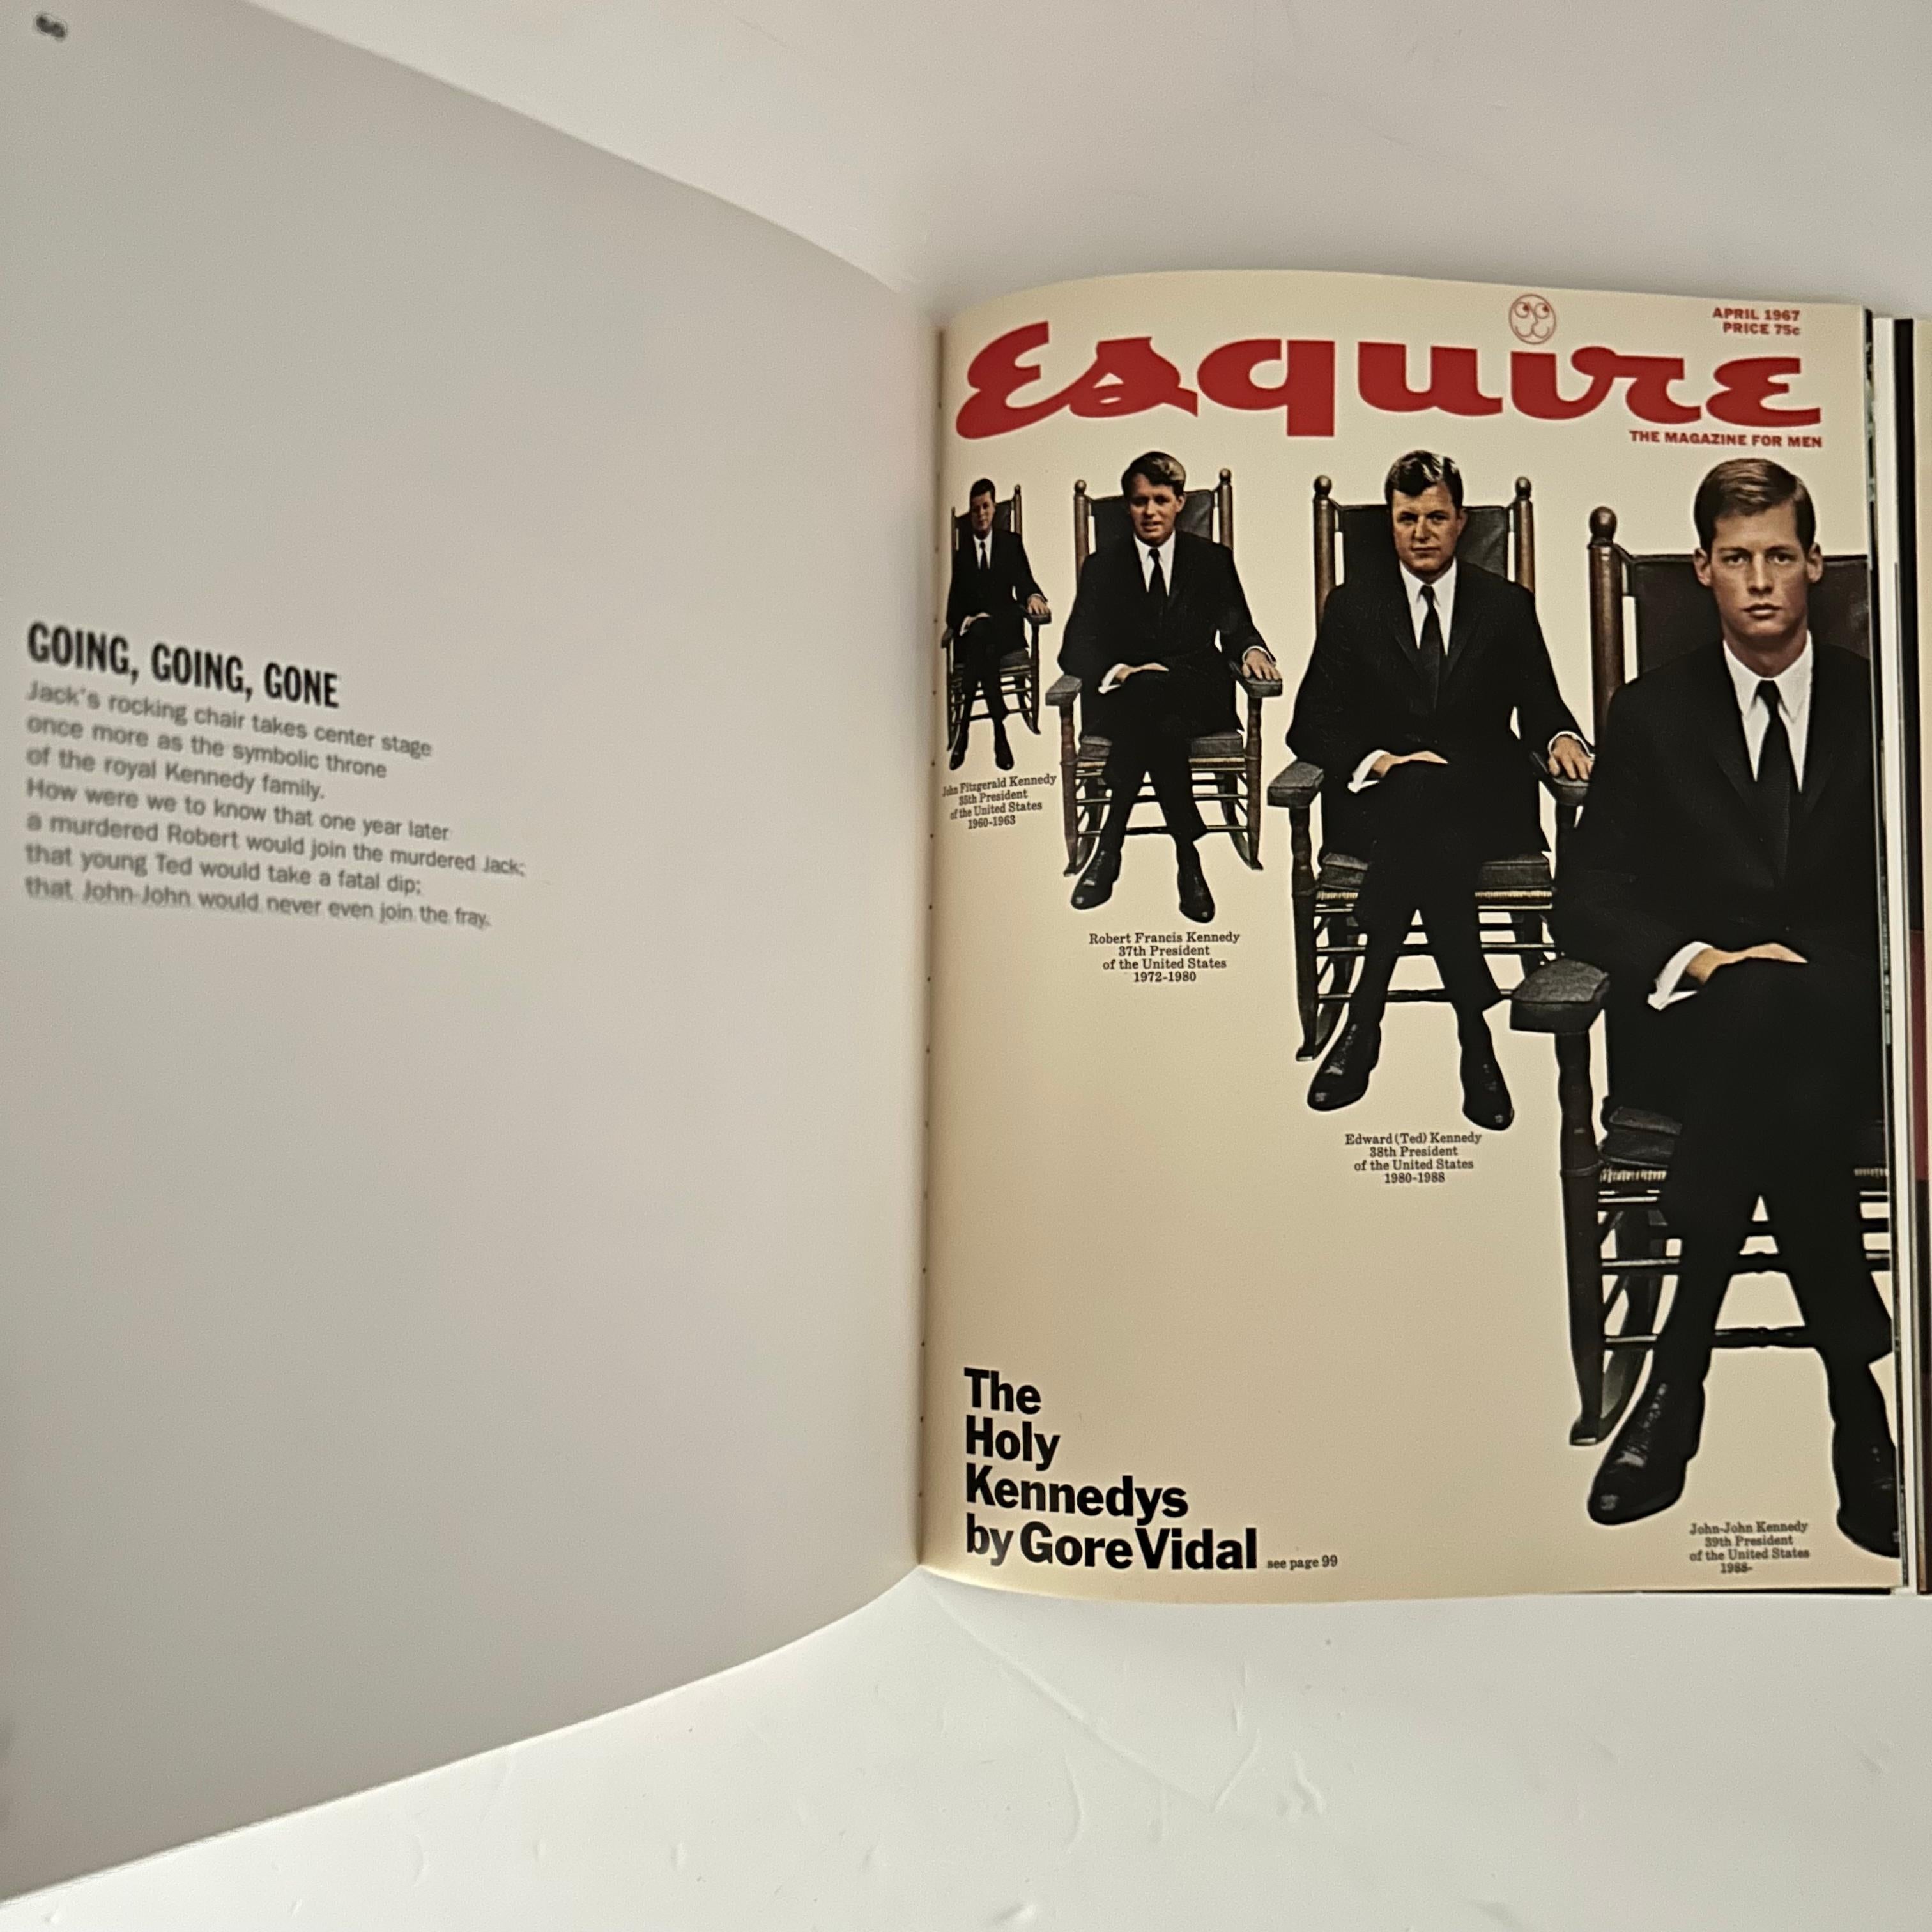 Covering the '60s: George Lois, The Esquire Era - 1st edition, New York, 1996 For Sale 1